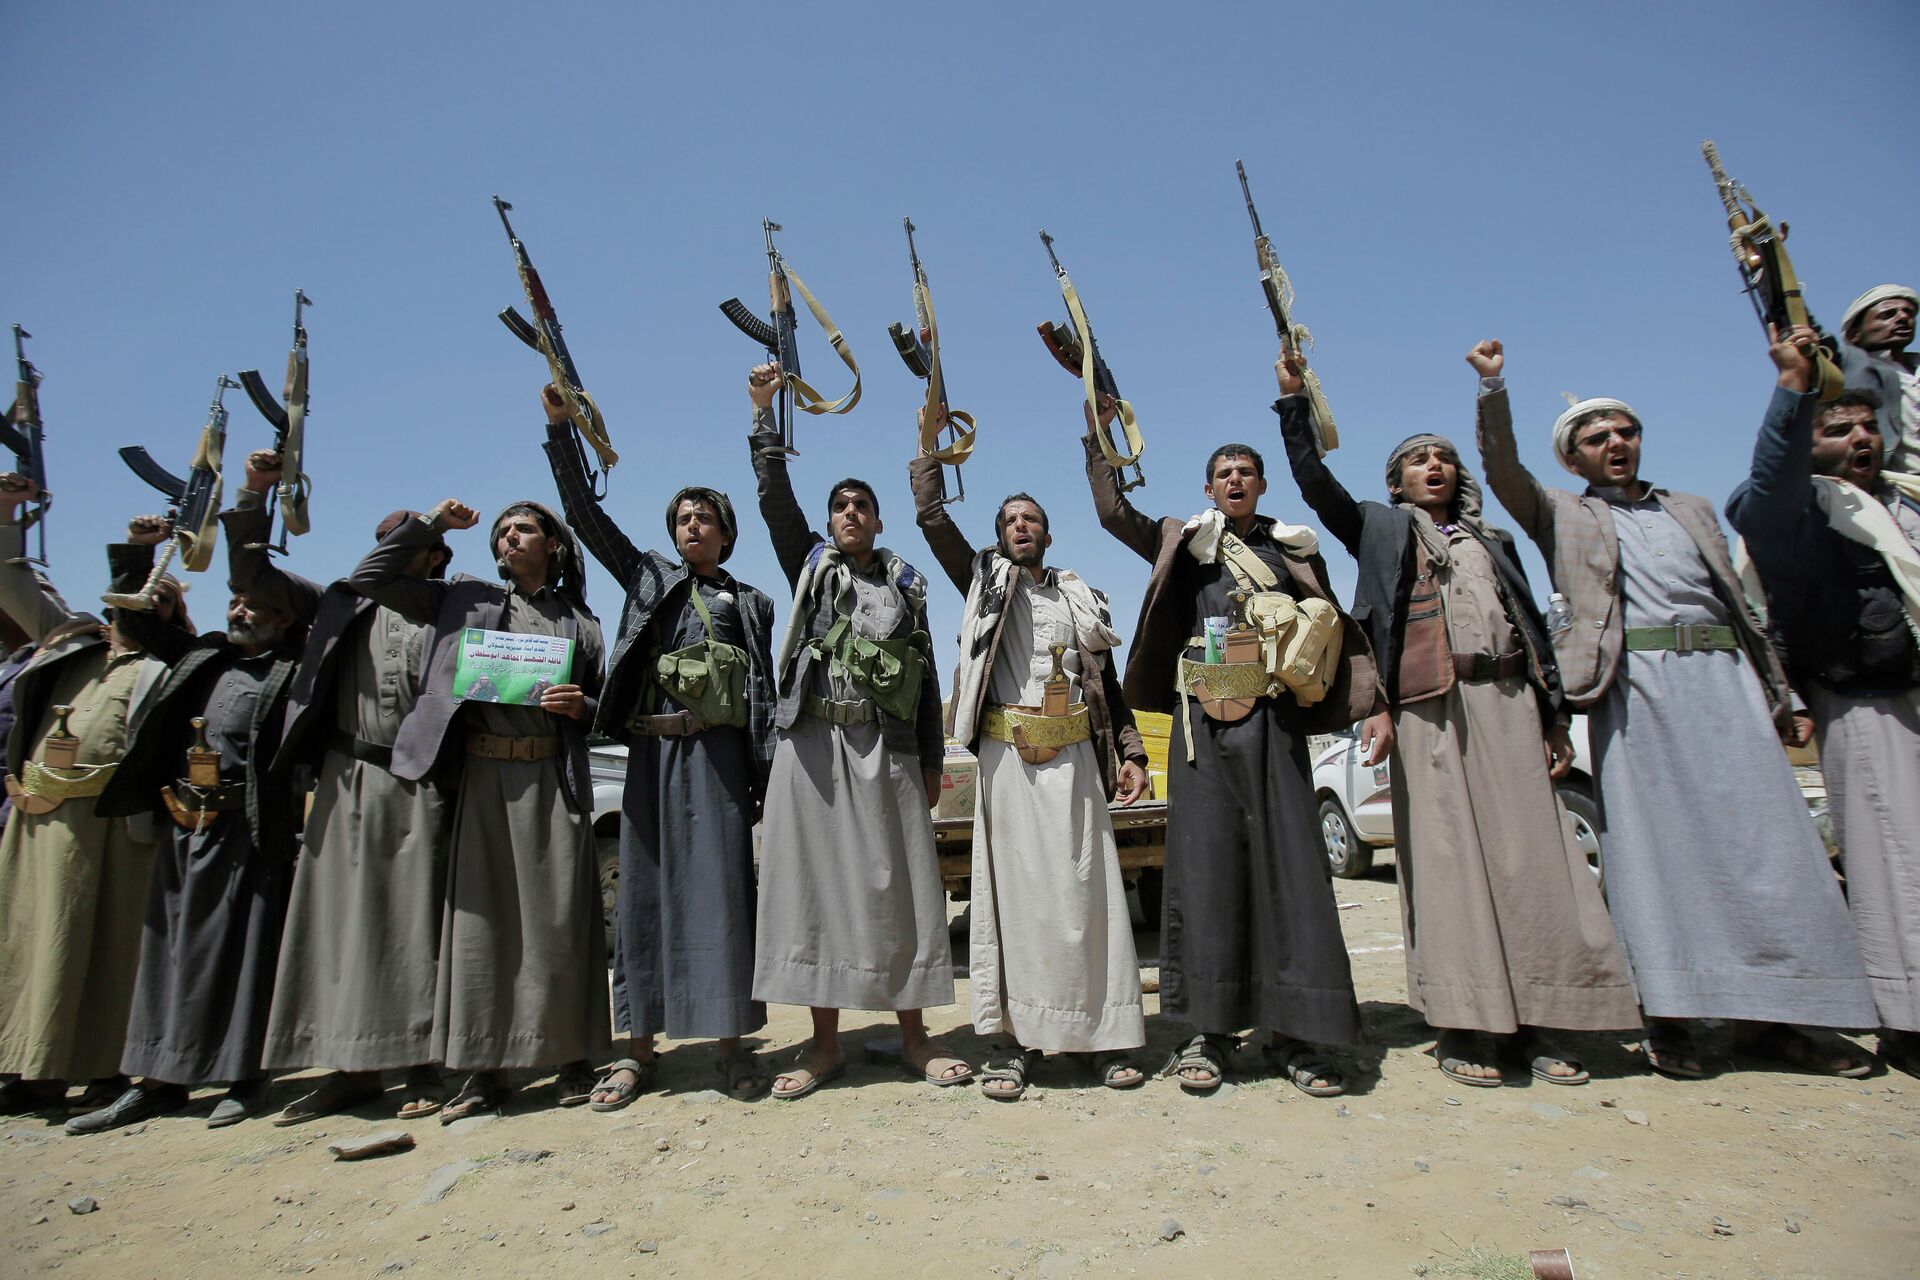 Shiite Houthi tribesmen hold their weapons as they chant slogans during a tribal gathering showing support for the Houthi movement, in Sanaa, Yemen, Saturday Sept. 21, 2019 - Sputnik International, 1920, 24.01.2022